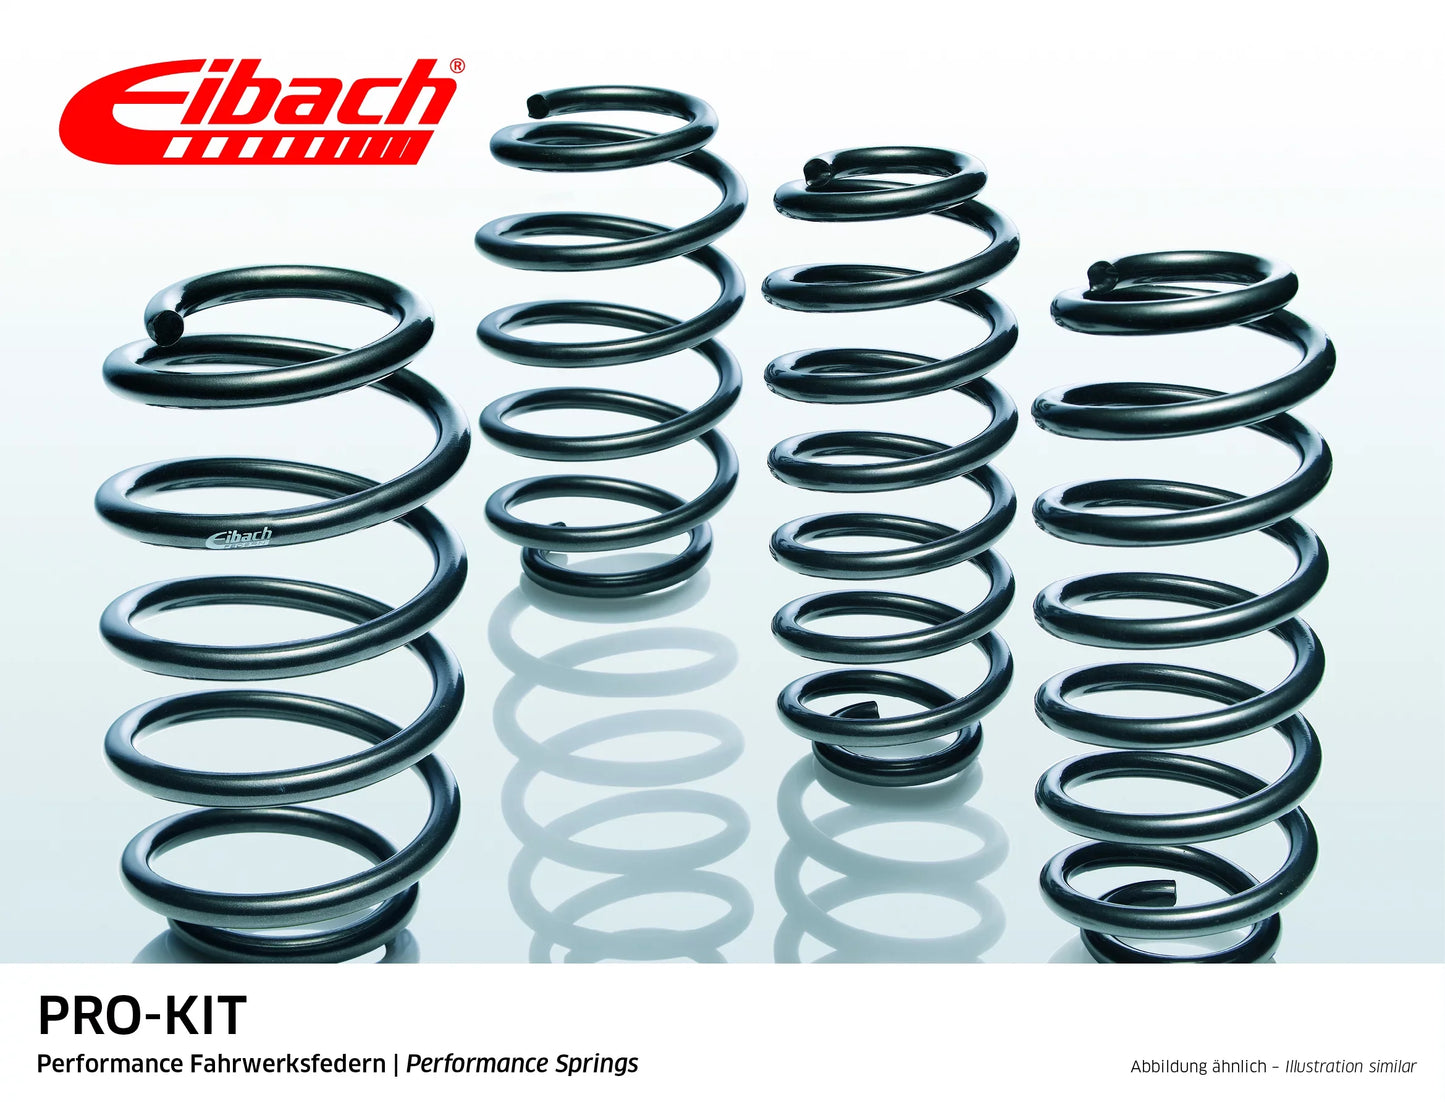 Eibach Pro-Kit Lowering Springs (E10-25-001-04-22) at £244.80